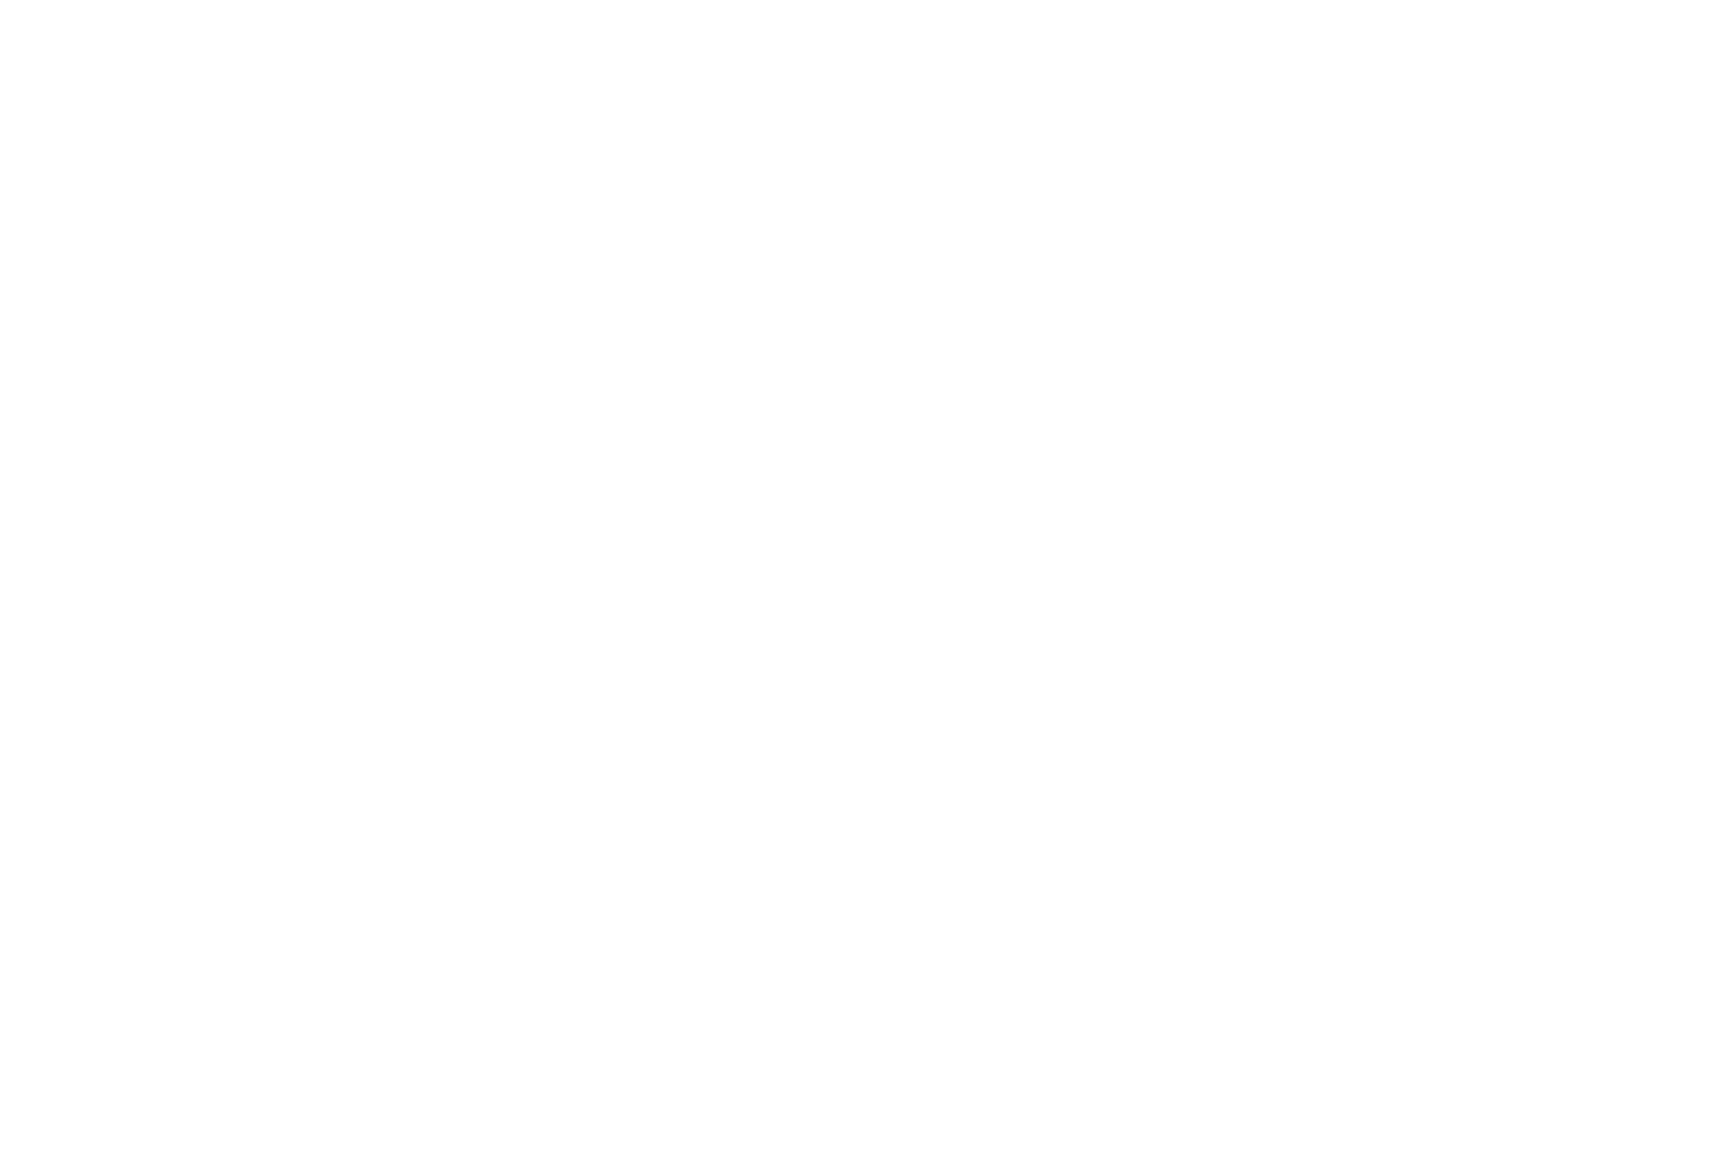 FINALIST NOMINEE - LOS ANGELES INDIE SHORT FEST - ONEFIFTY - XTC